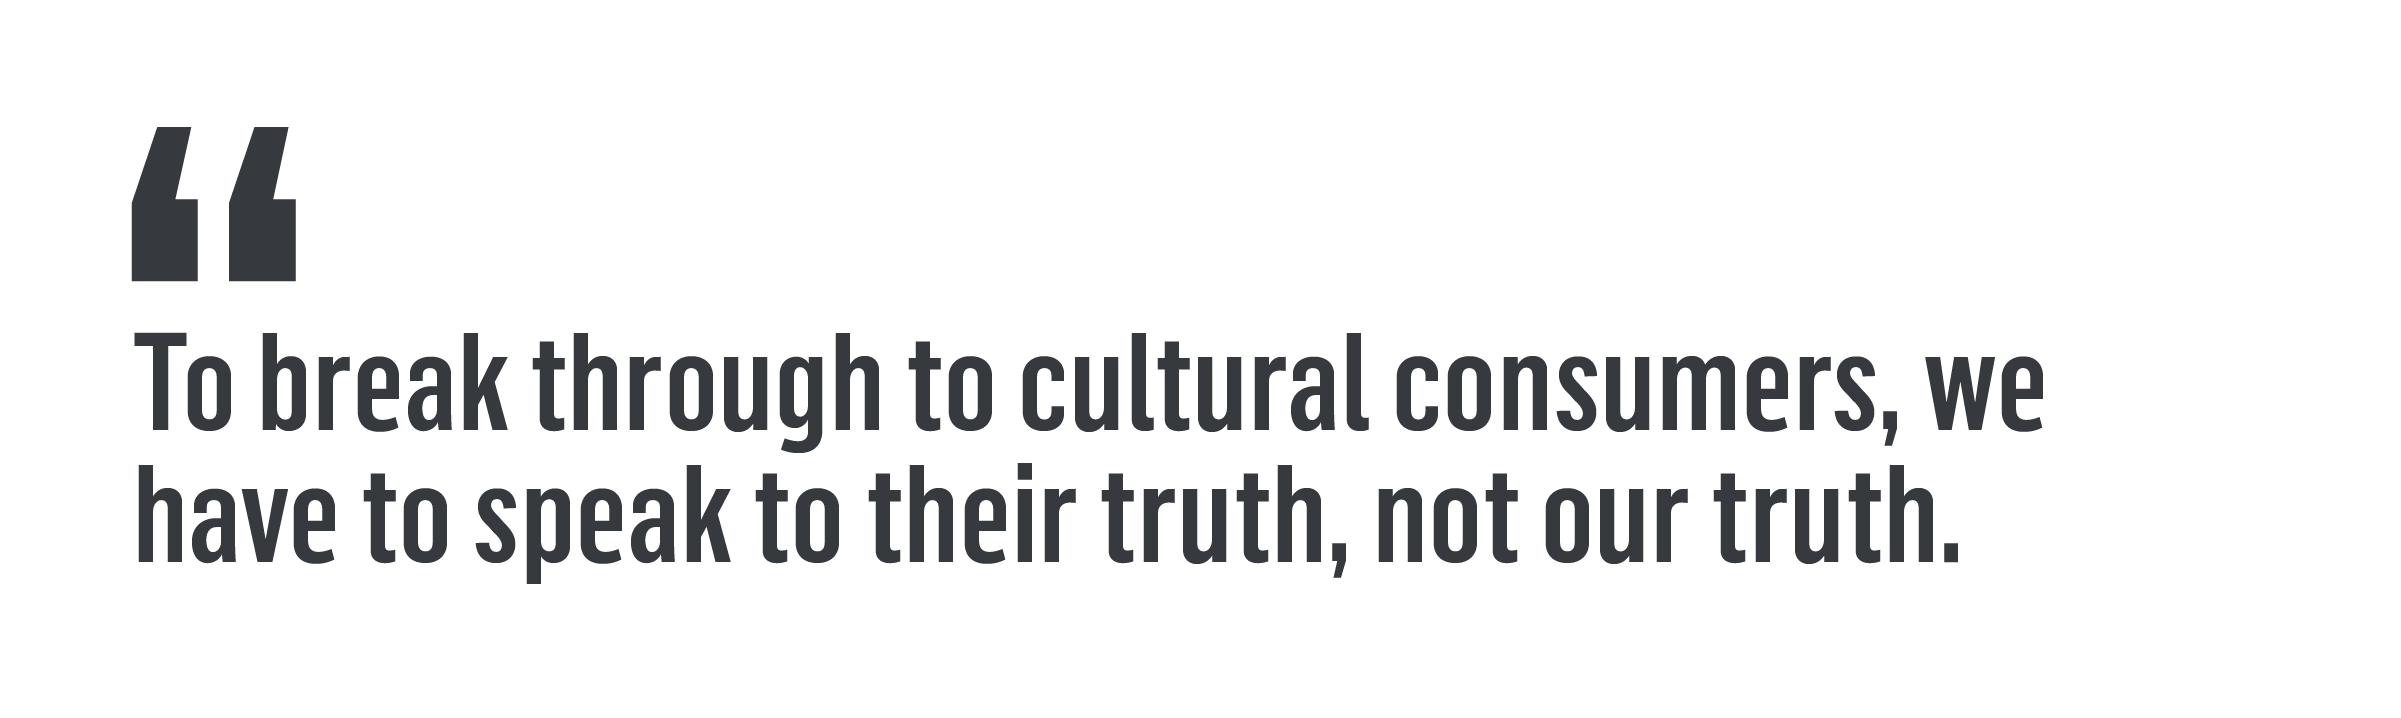 "To break through to cultural consumers, we have to speak to their truth, not our truth."